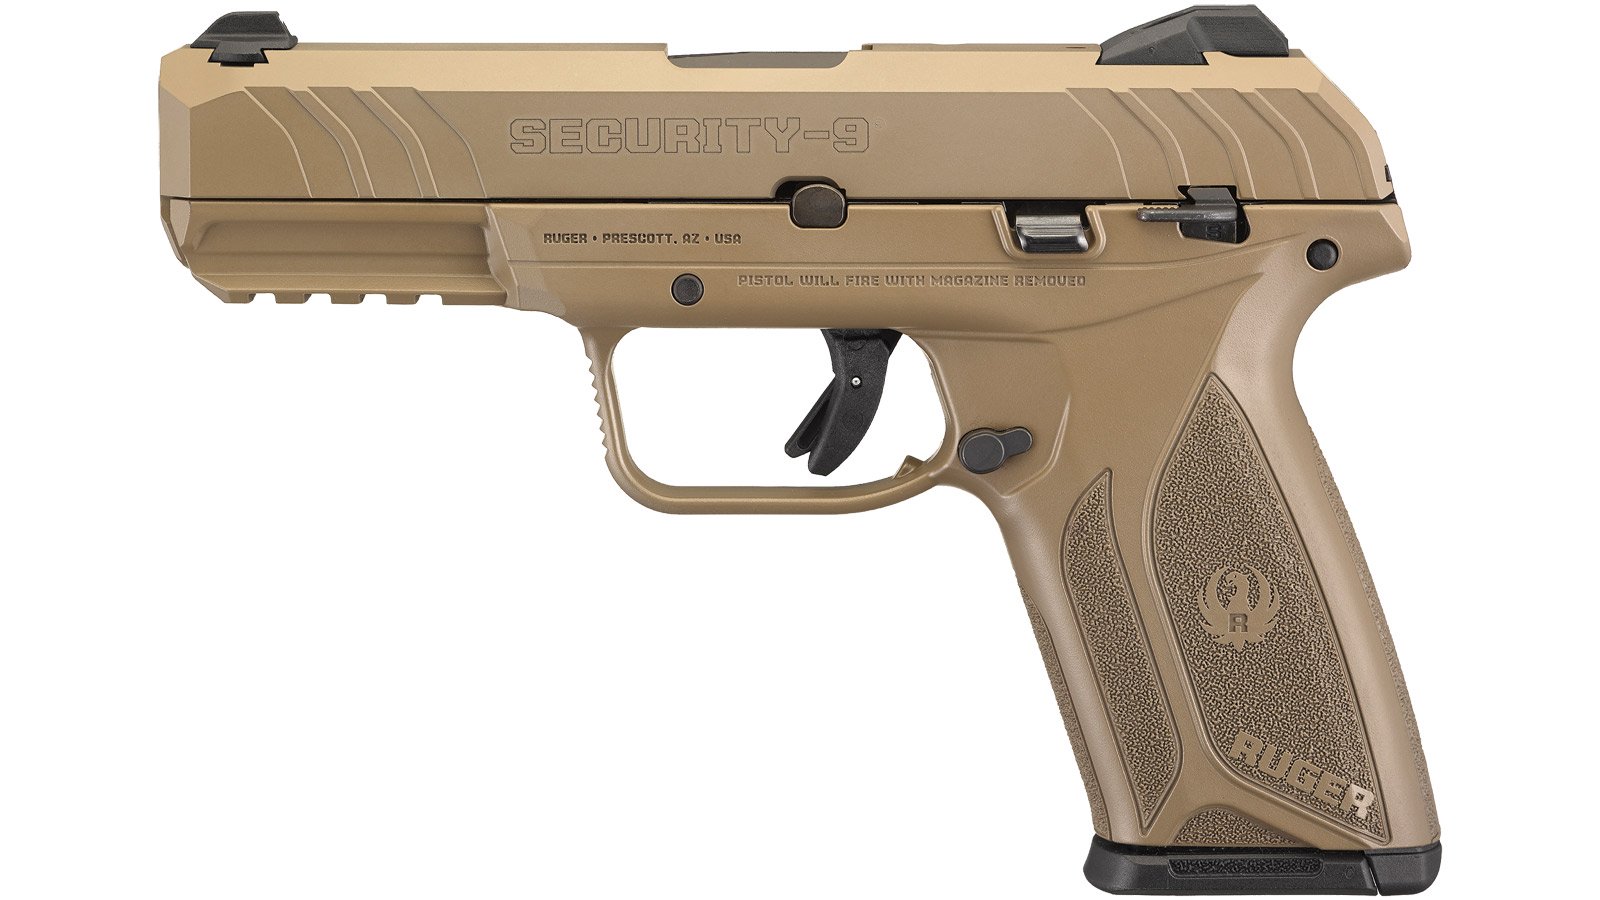 Ruger Security-9 Pistol Coyote Brown 9mm 4" 15 RD Adjustable Sight...